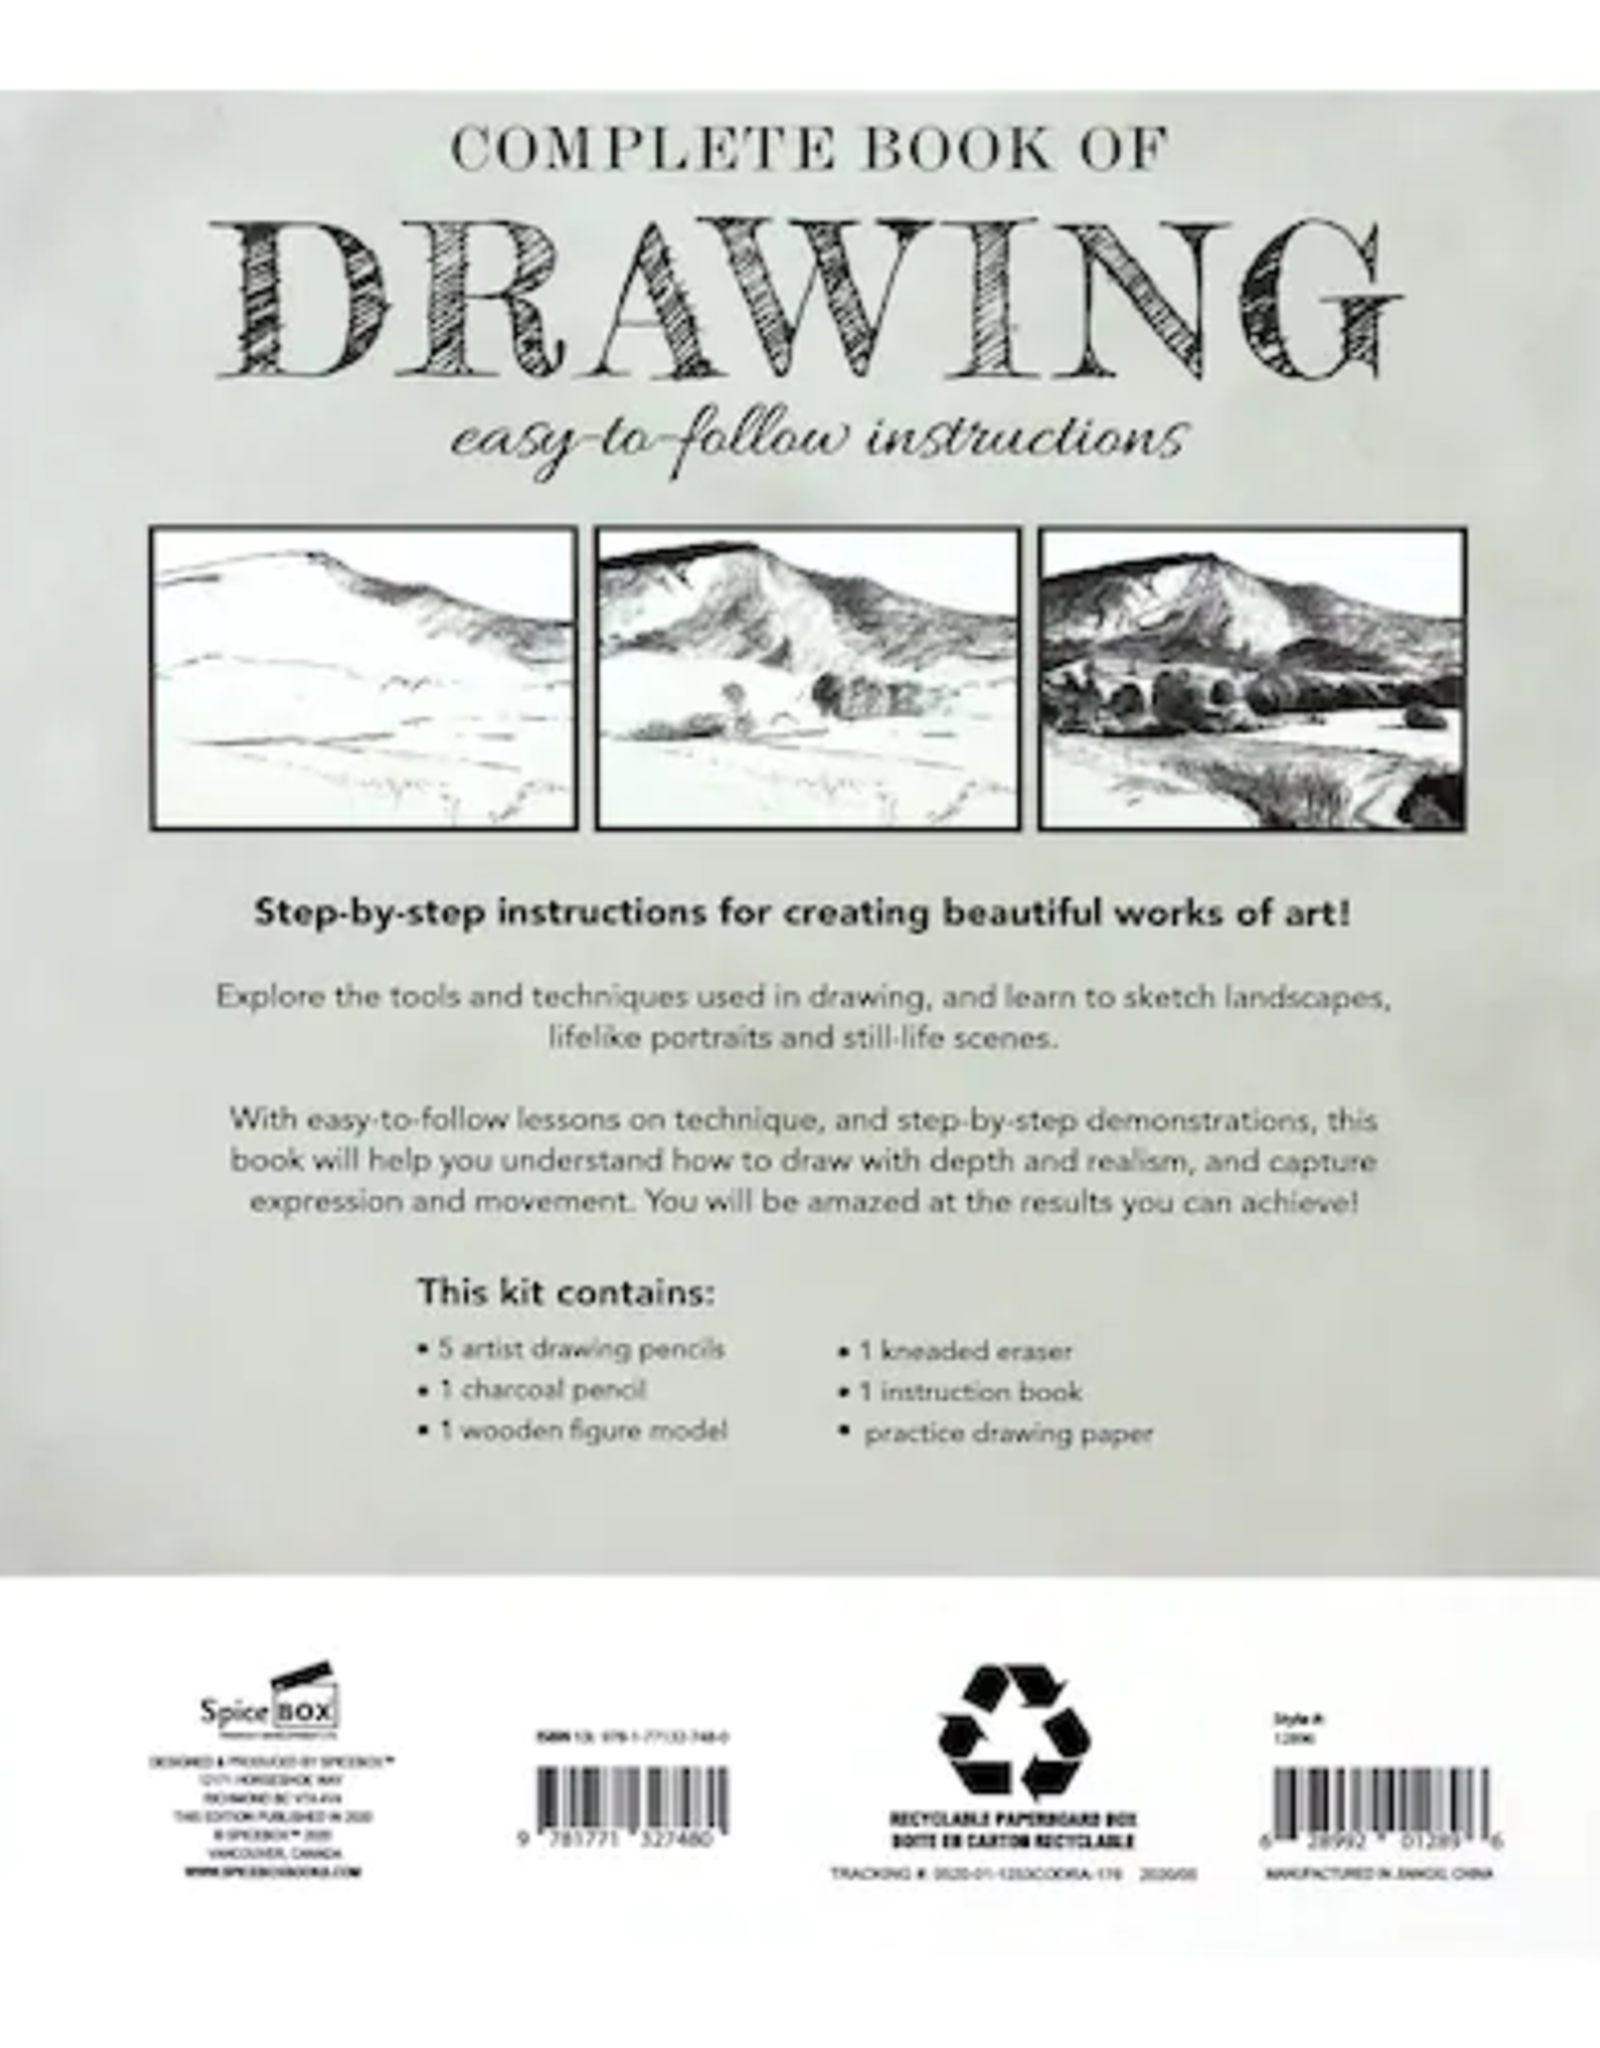 SpiceBox SpiceBox - Complete Book of Drawing